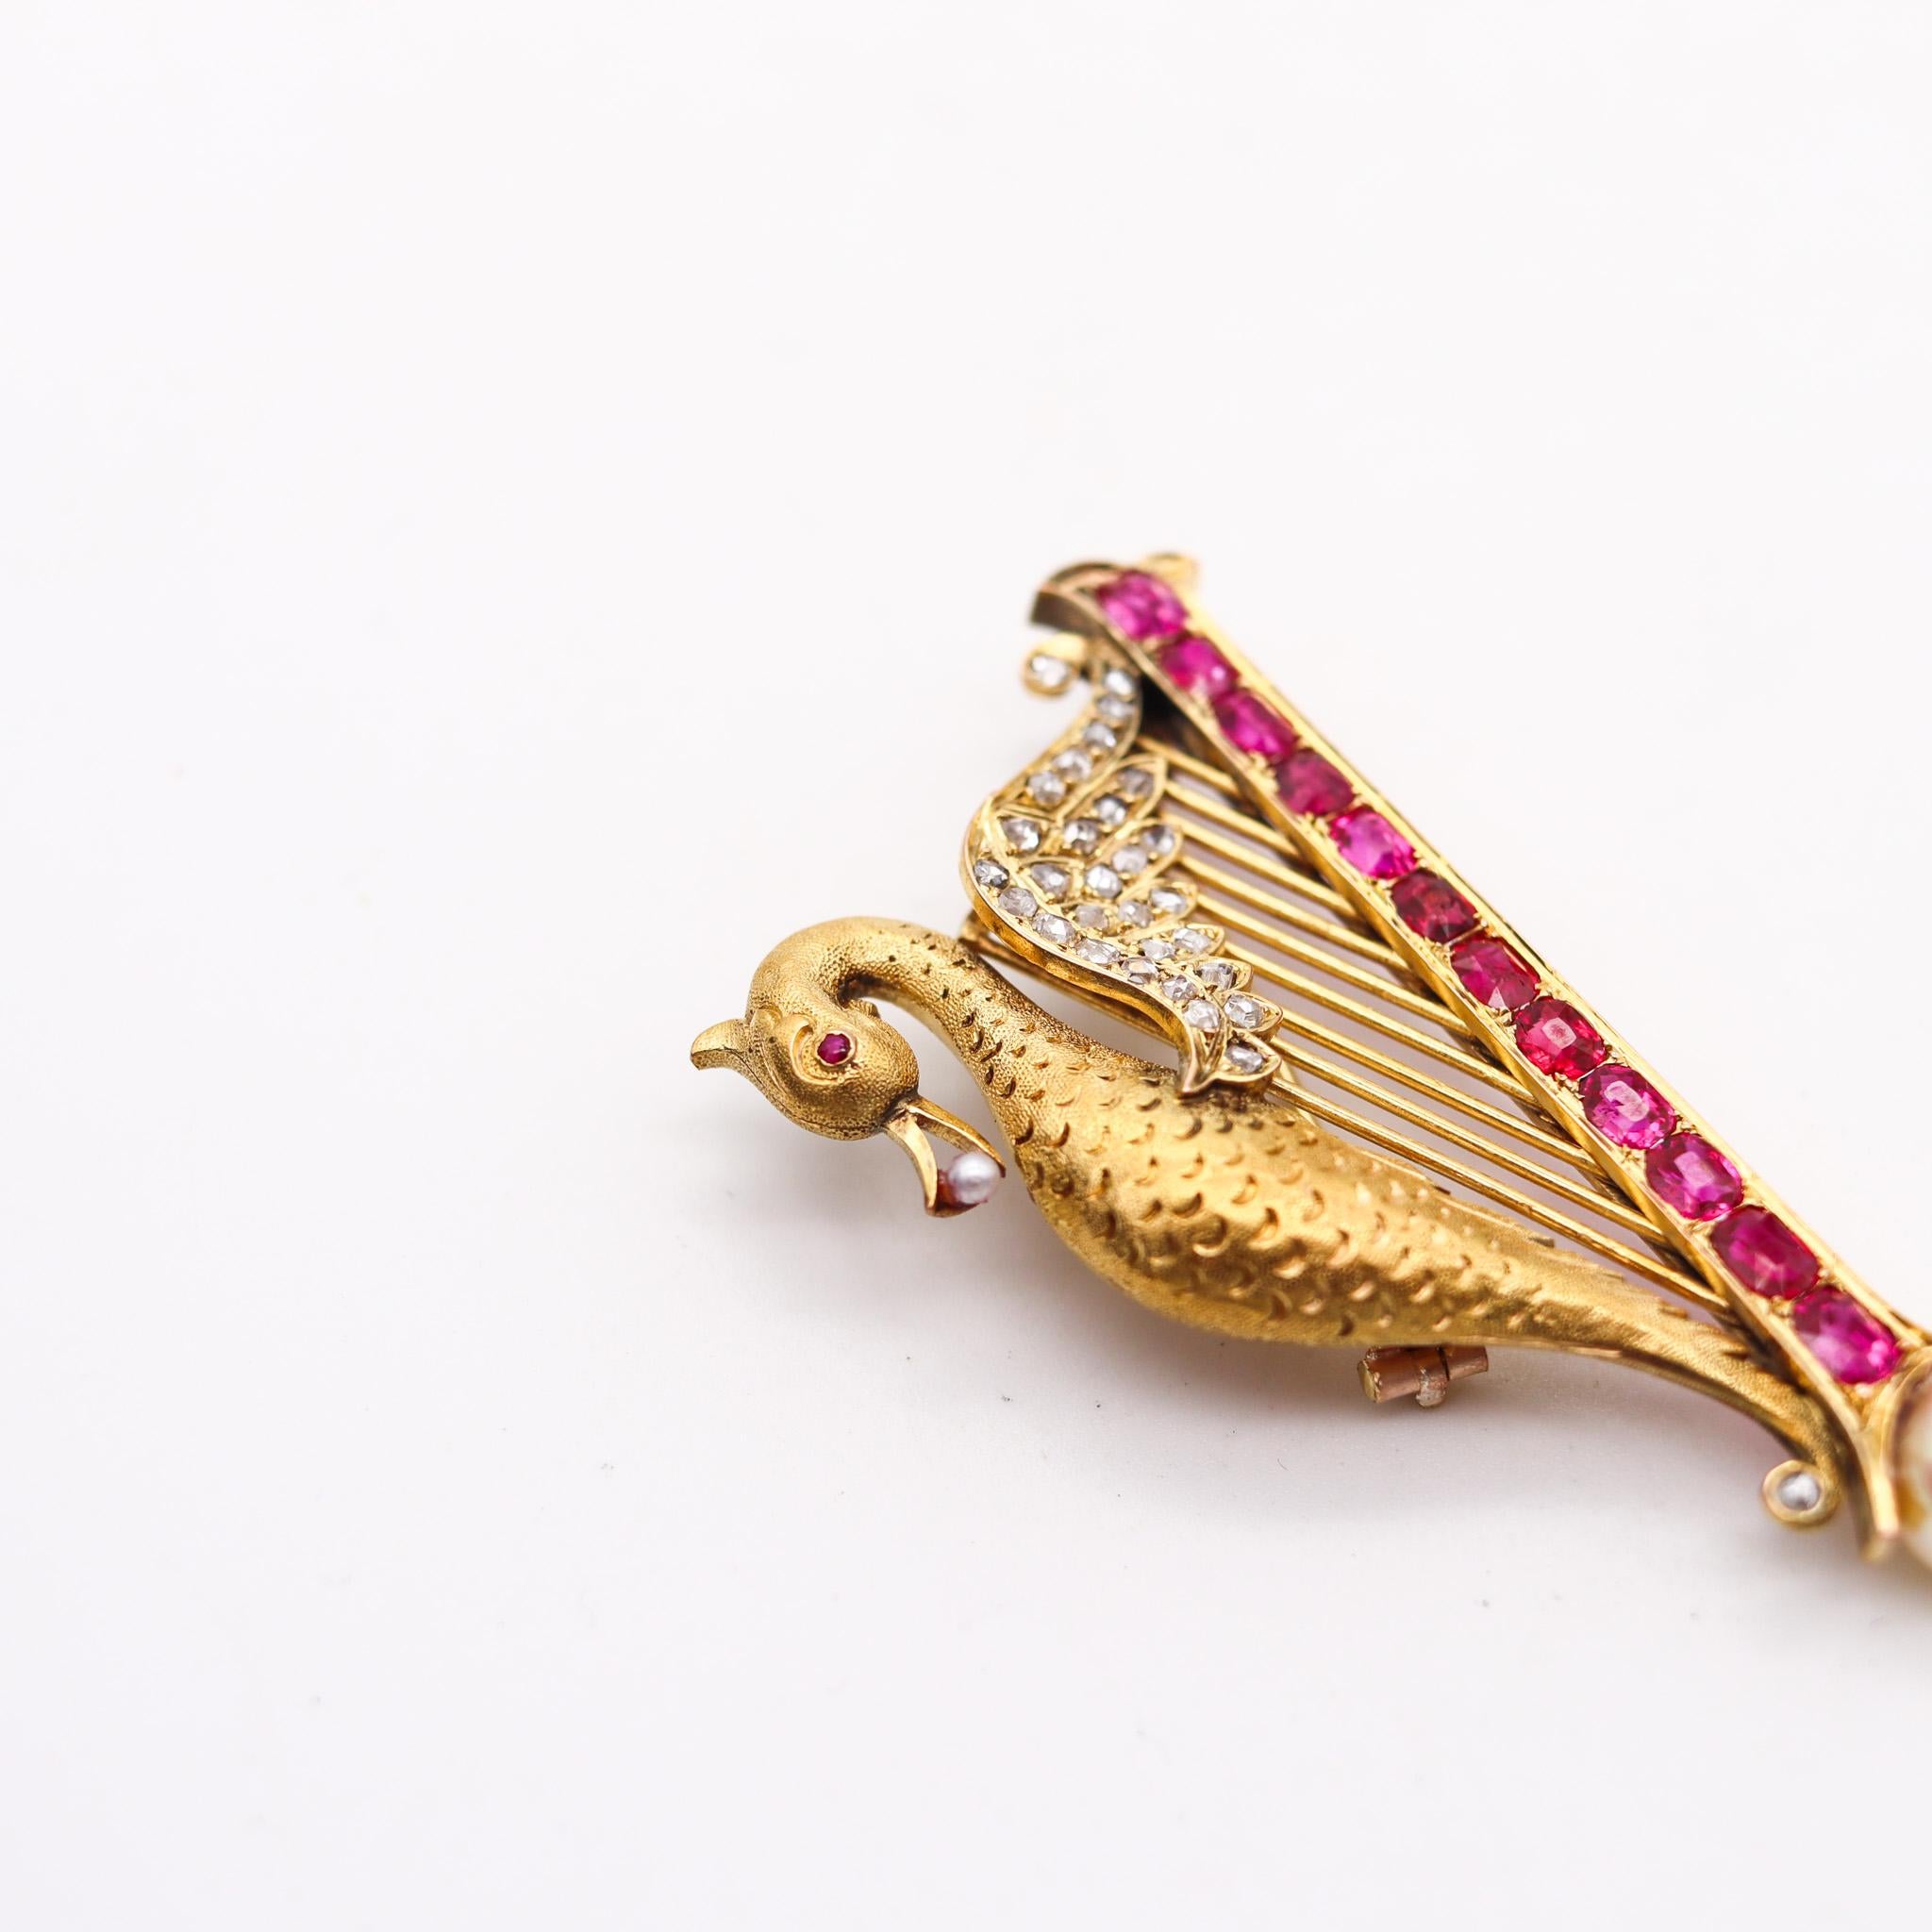 French 1890 Art Nouveau Swan Arp Brooch 18Kt Gold With 5.05 Ctw Rubies Diamonds In Excellent Condition For Sale In Miami, FL